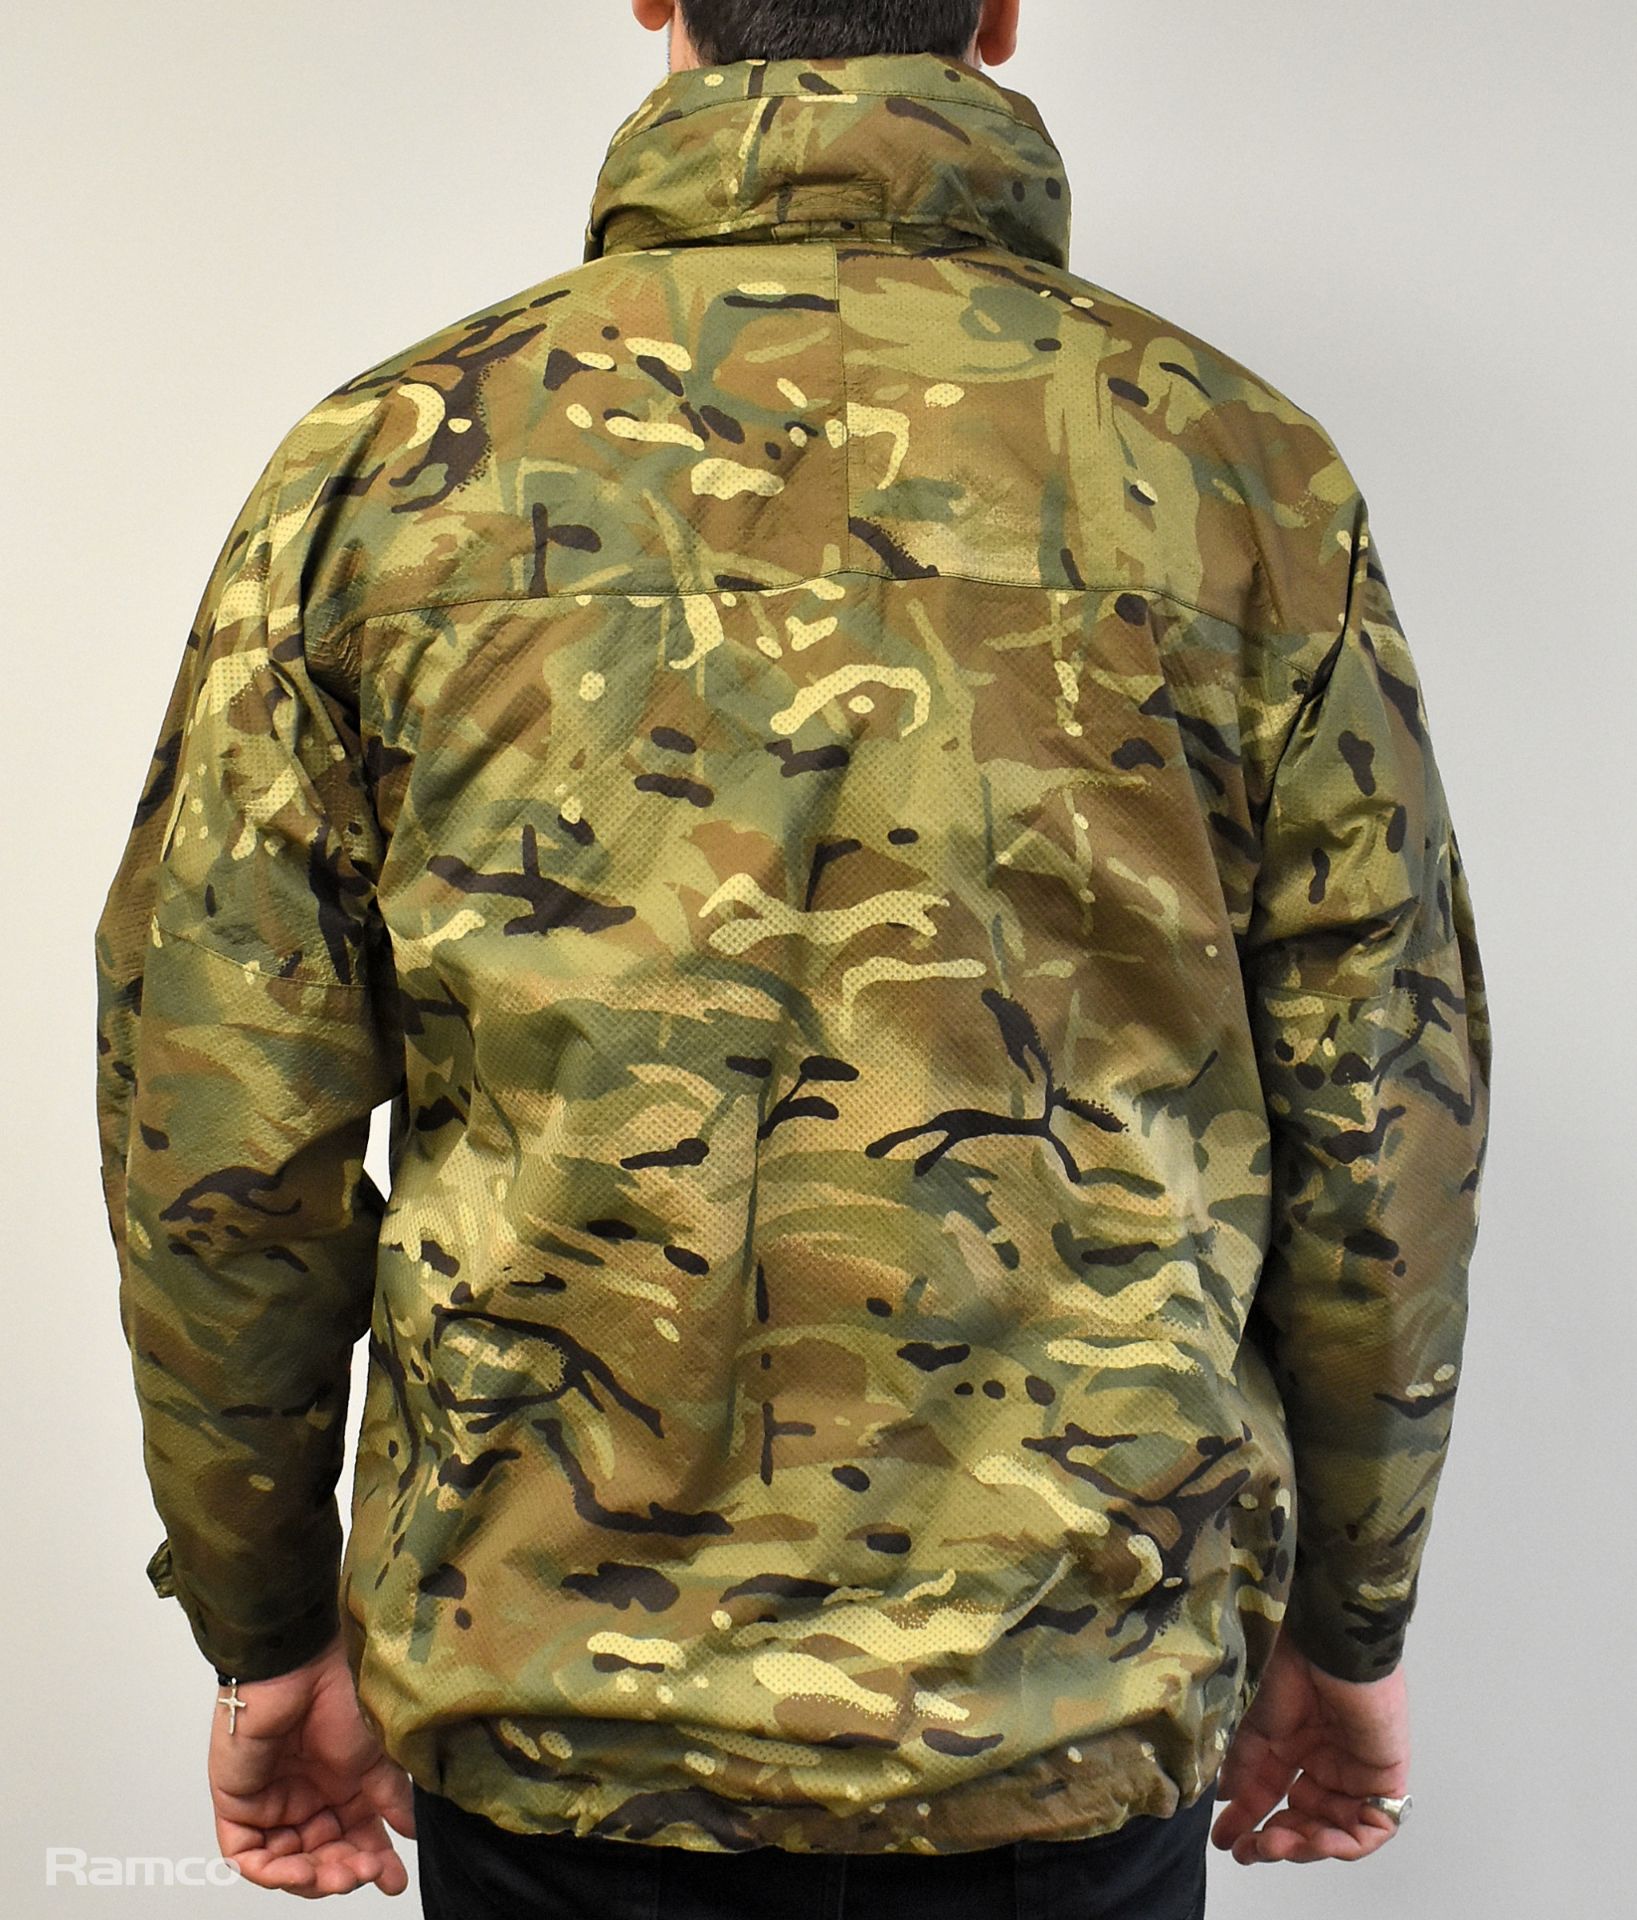 20x British Army MTP waterproof lightweight jackets - mixed grades and sizes - Image 3 of 14